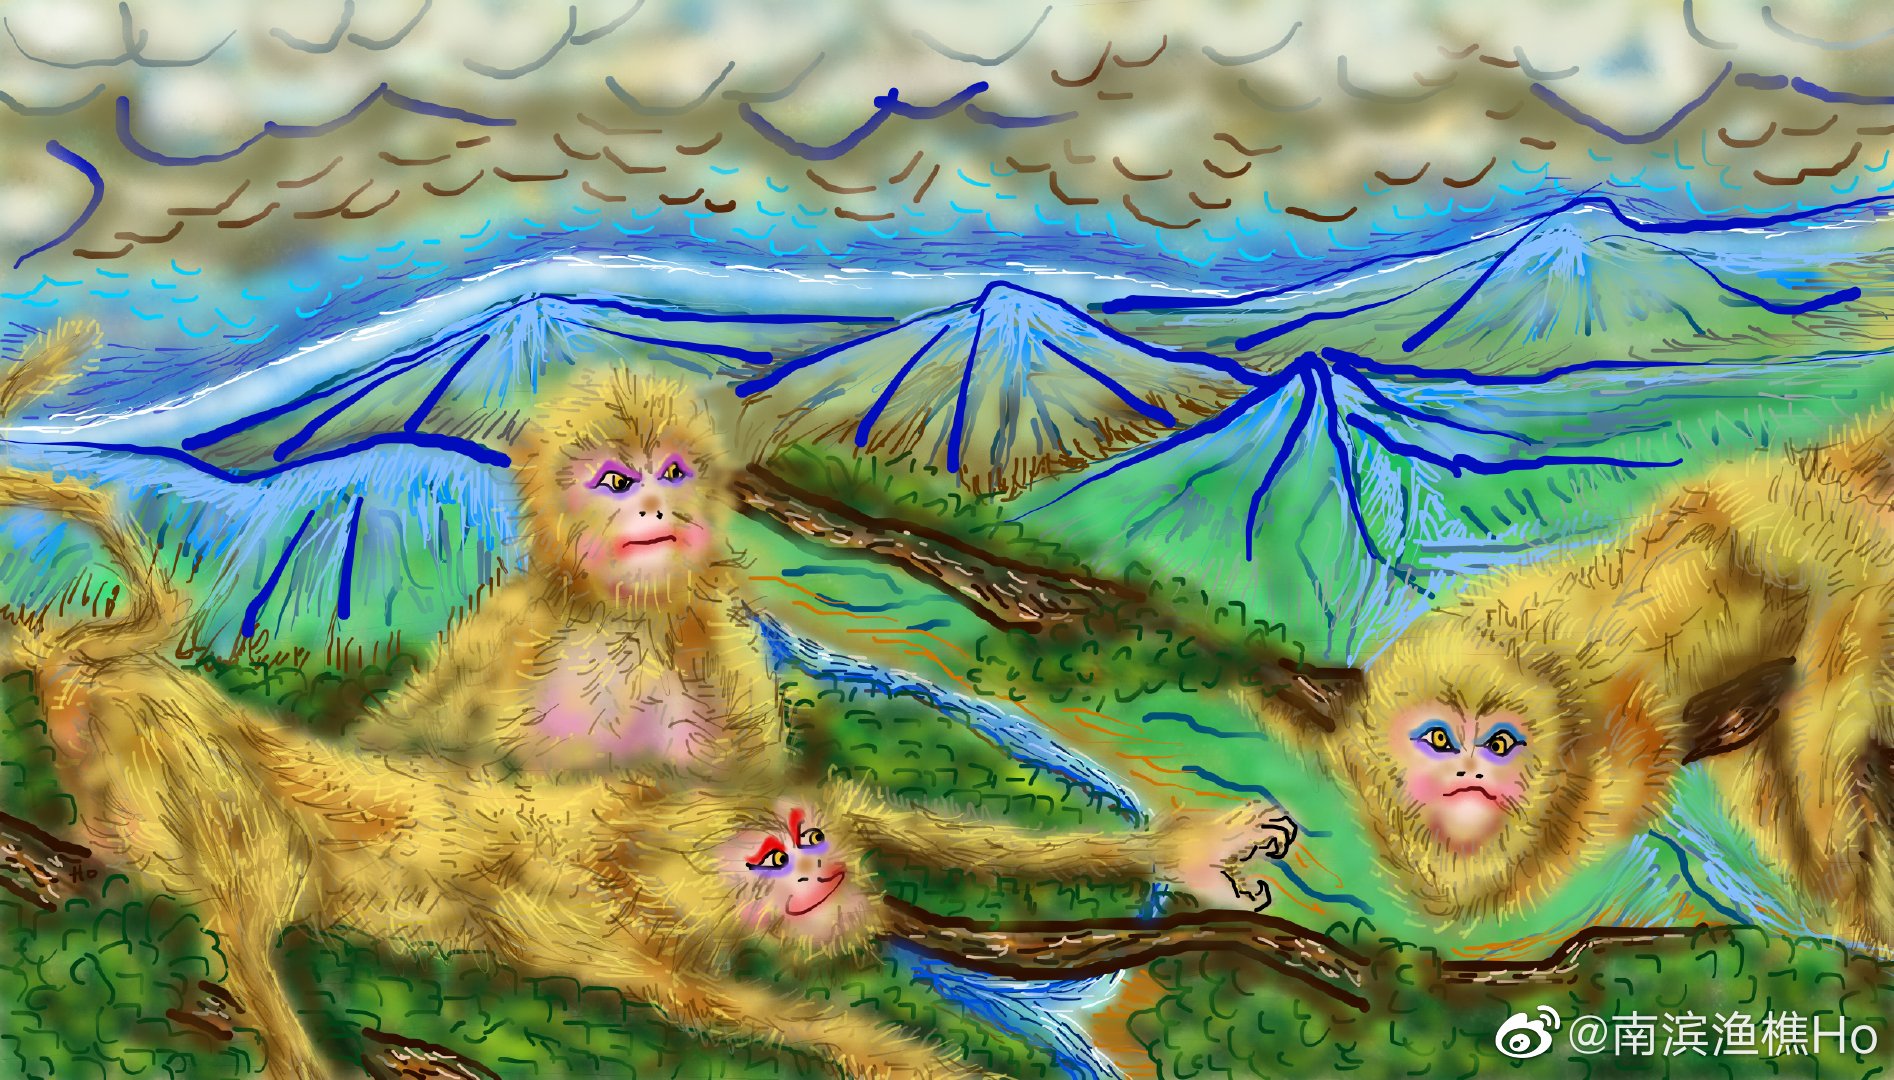 Monkey Traditional Art Classic Art Landscape Forest Mountain View Digital Painting Painting Artwork 1894x1080